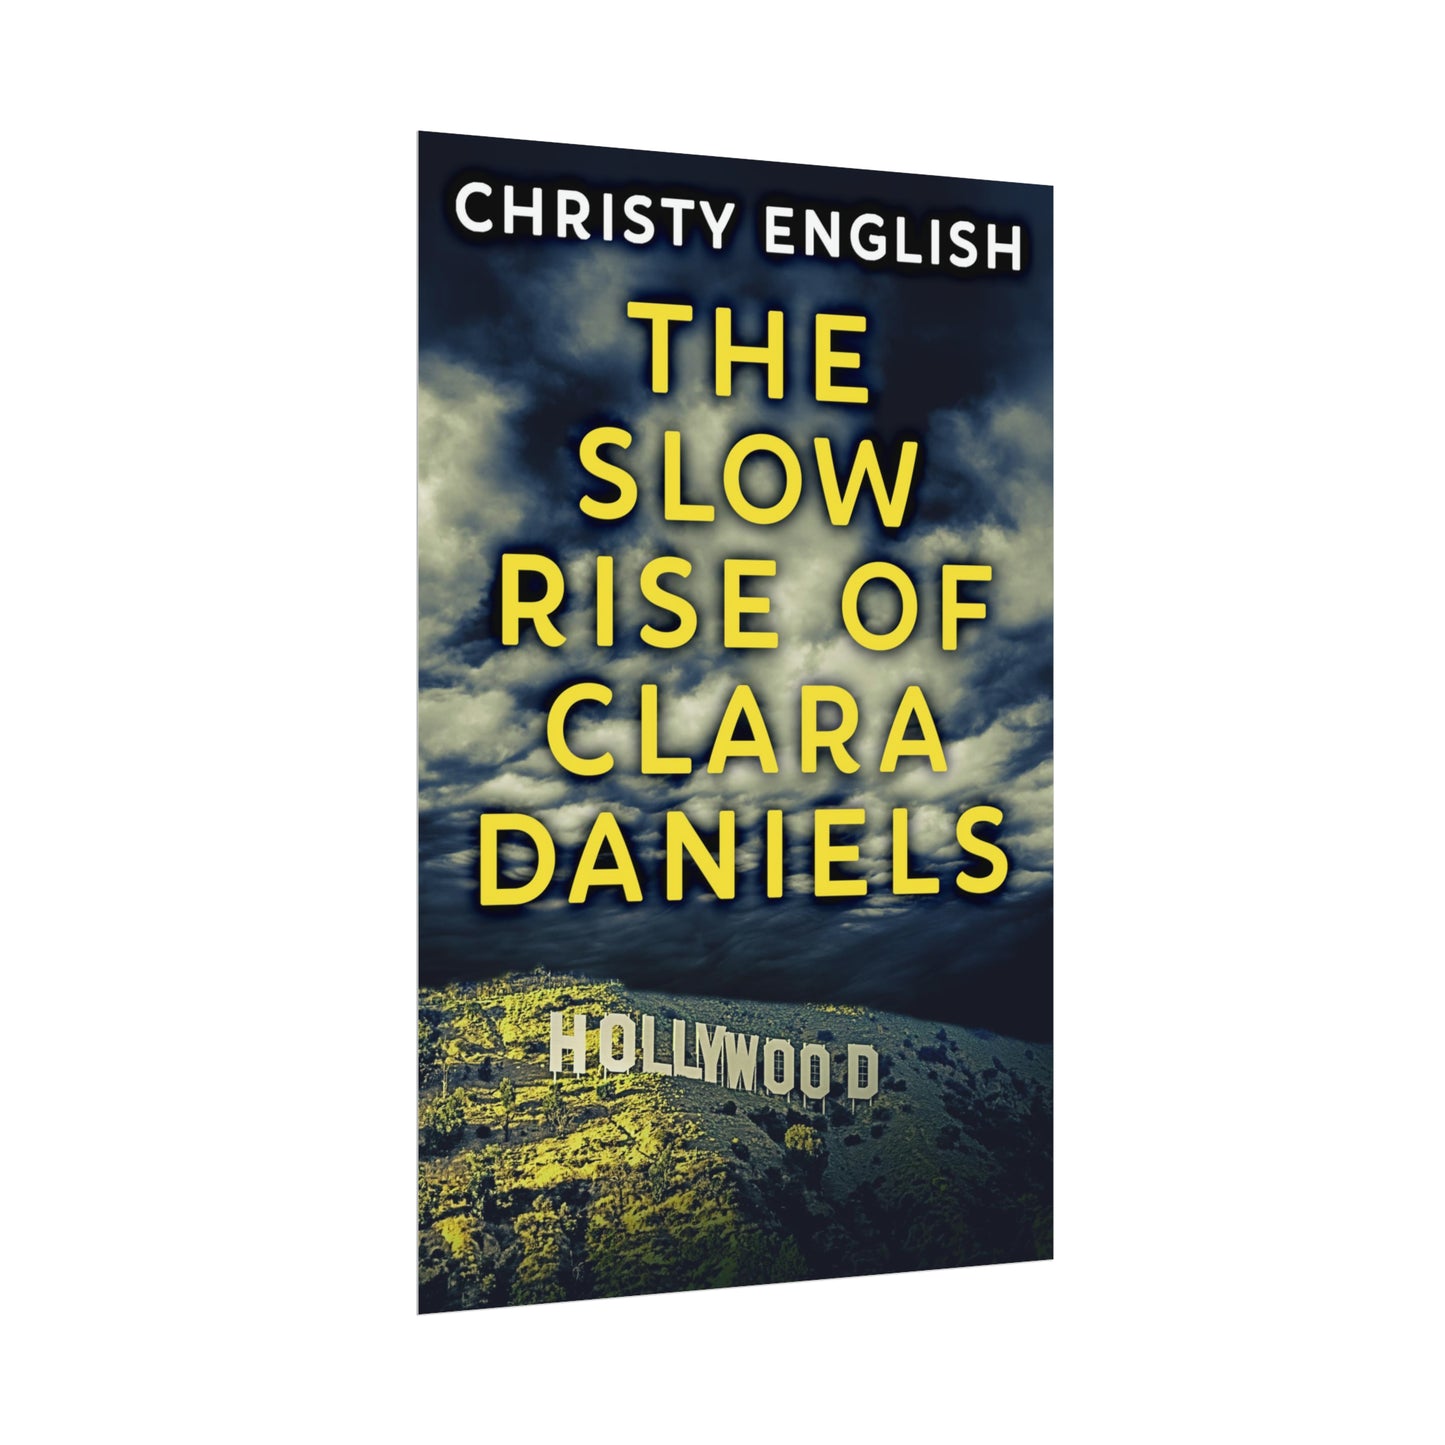 The Slow Rise Of Clara Daniels - Rolled Poster